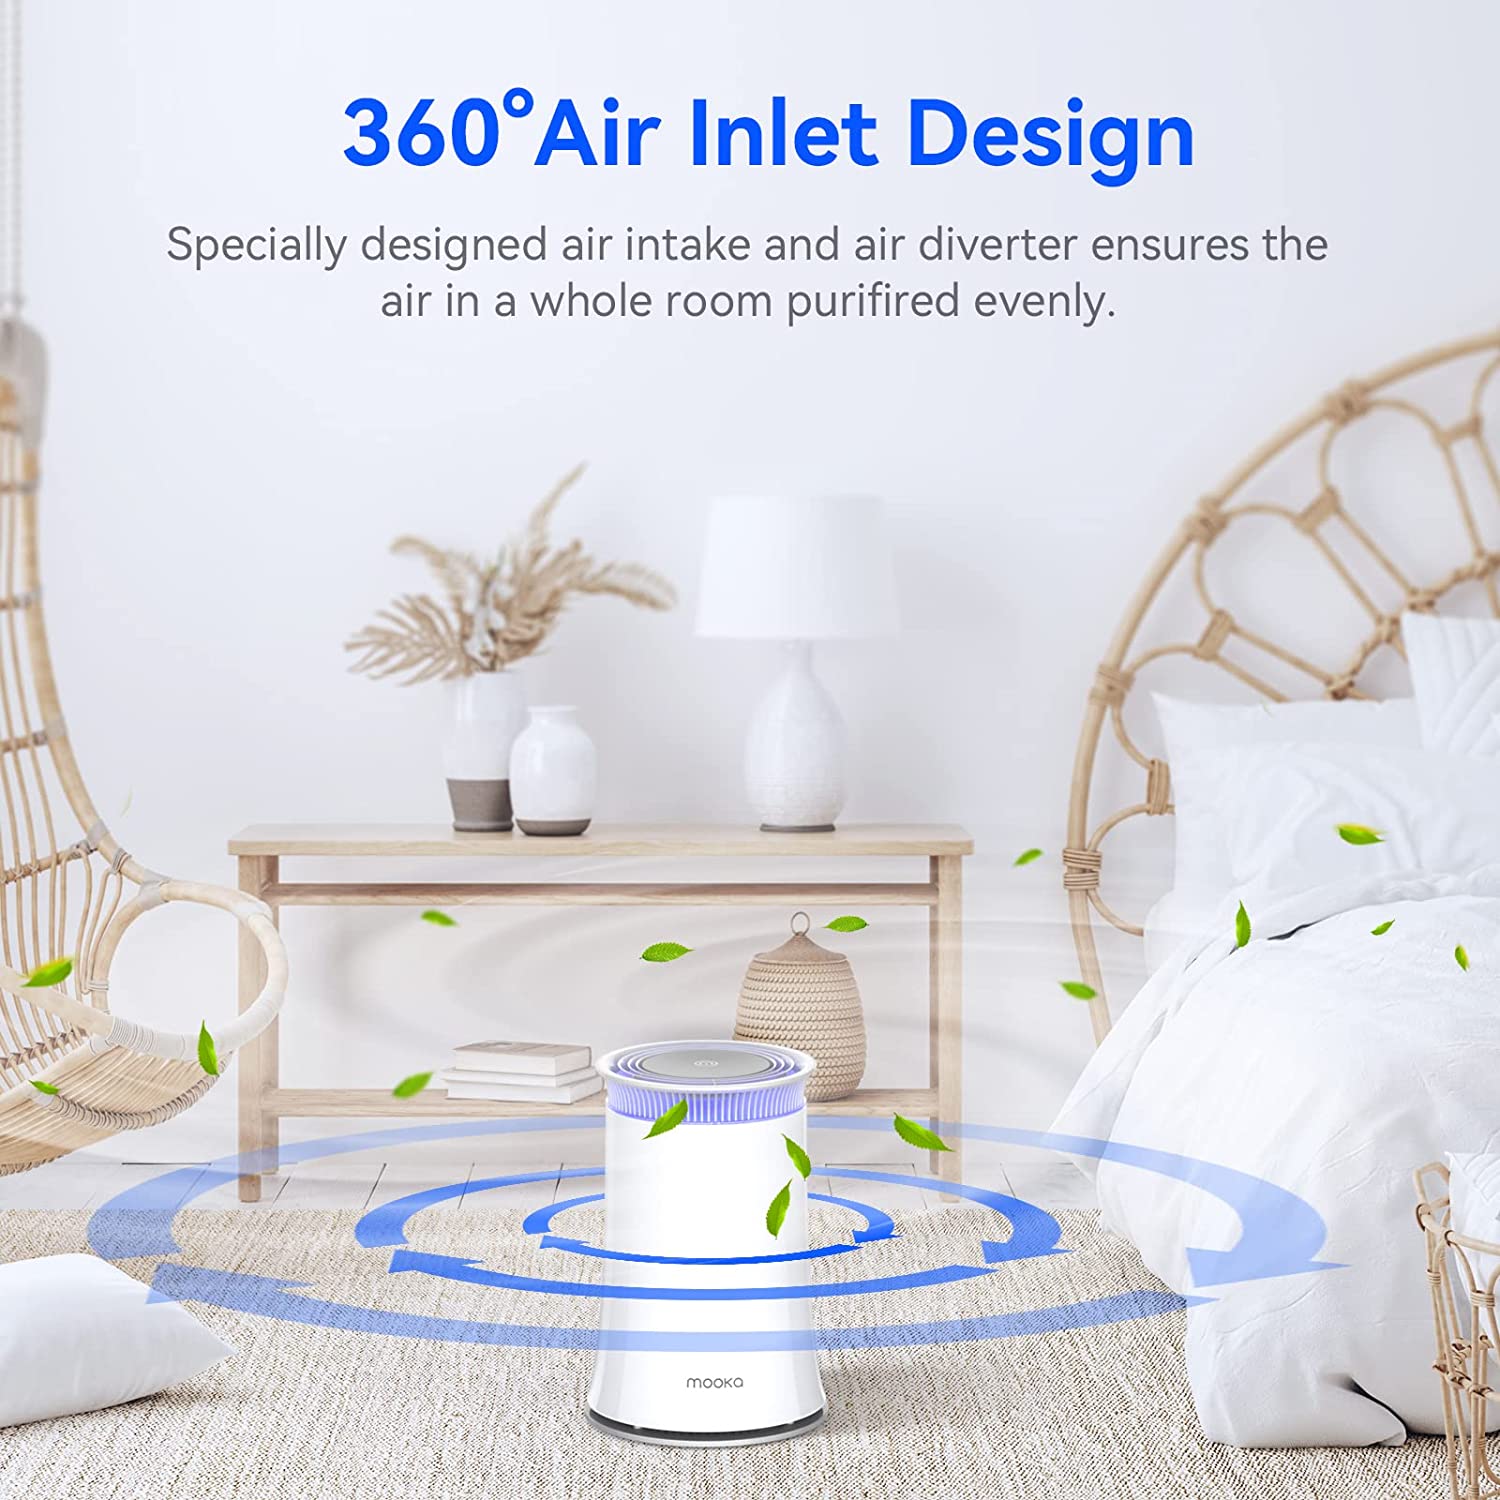 Mooka Air Purifier for Home, True HEPA Air Cleaner , Activated Carbon Filter, Up to 540 sqft, KJ120G-C10, White